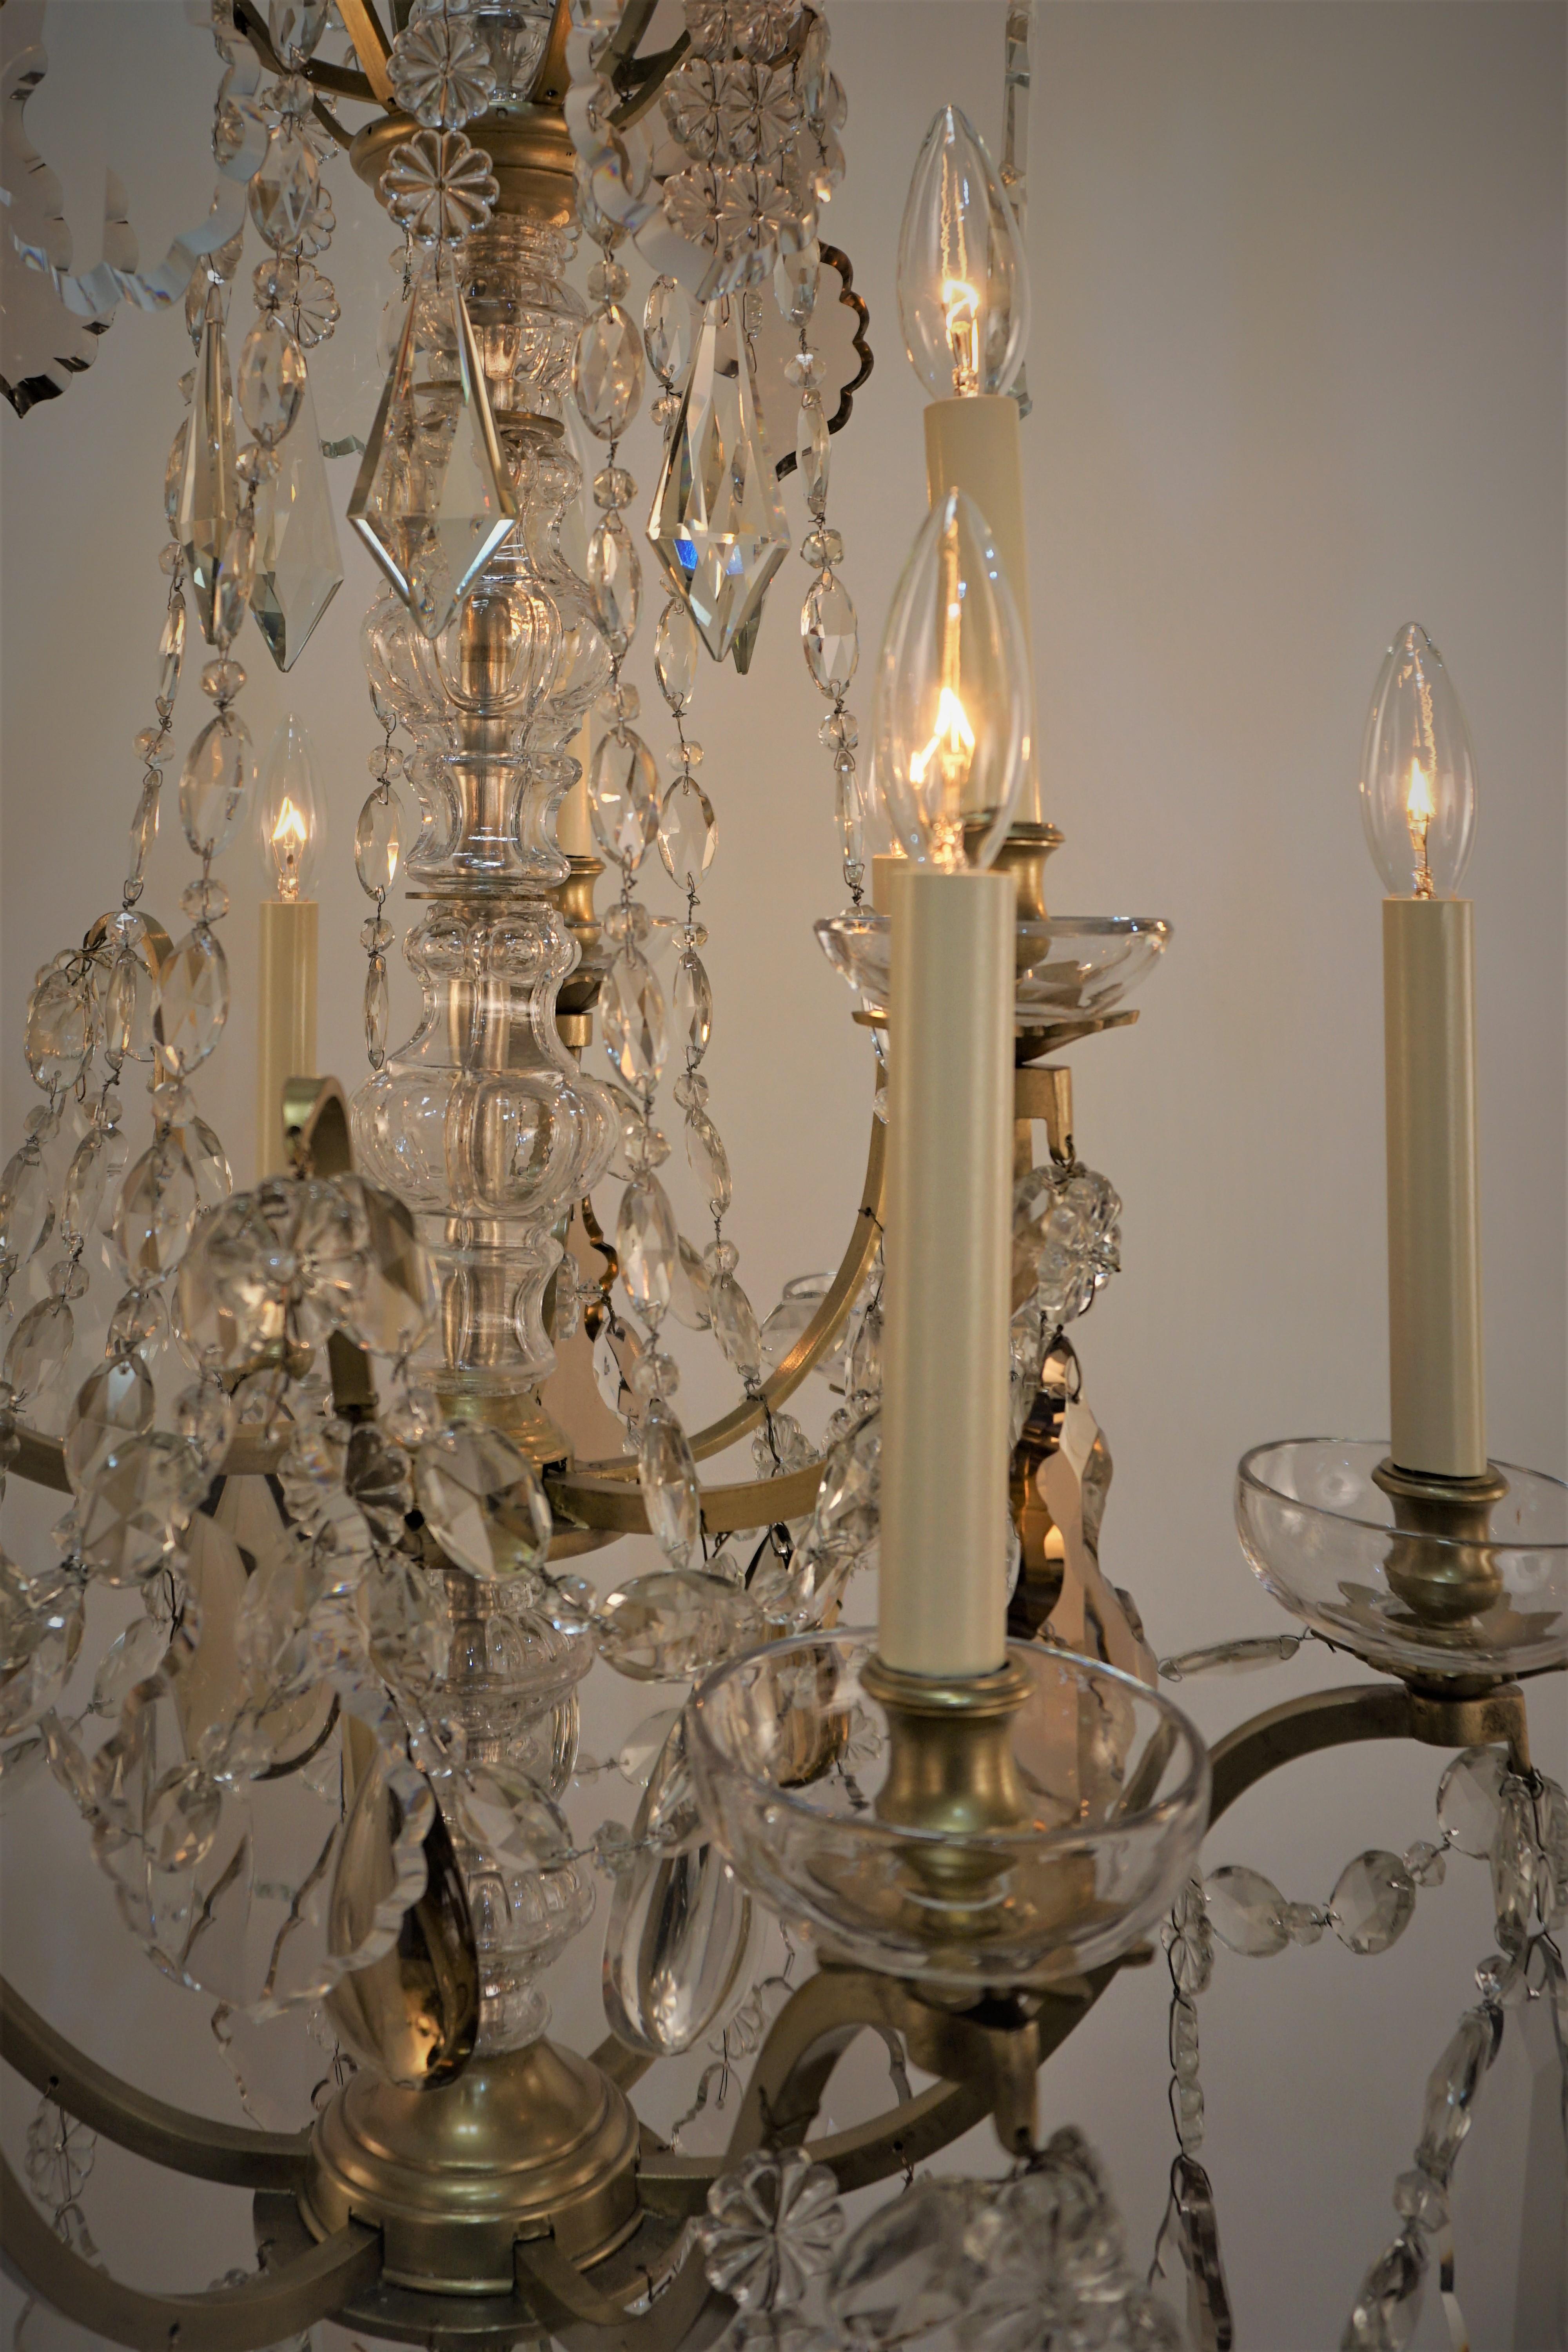 Fantastic nine light crystal and bronze chandelier, crafted in France in 1930s by famous lighting company Bagues. 
Professionally rewired and ready for installation.
Measurement: width 24